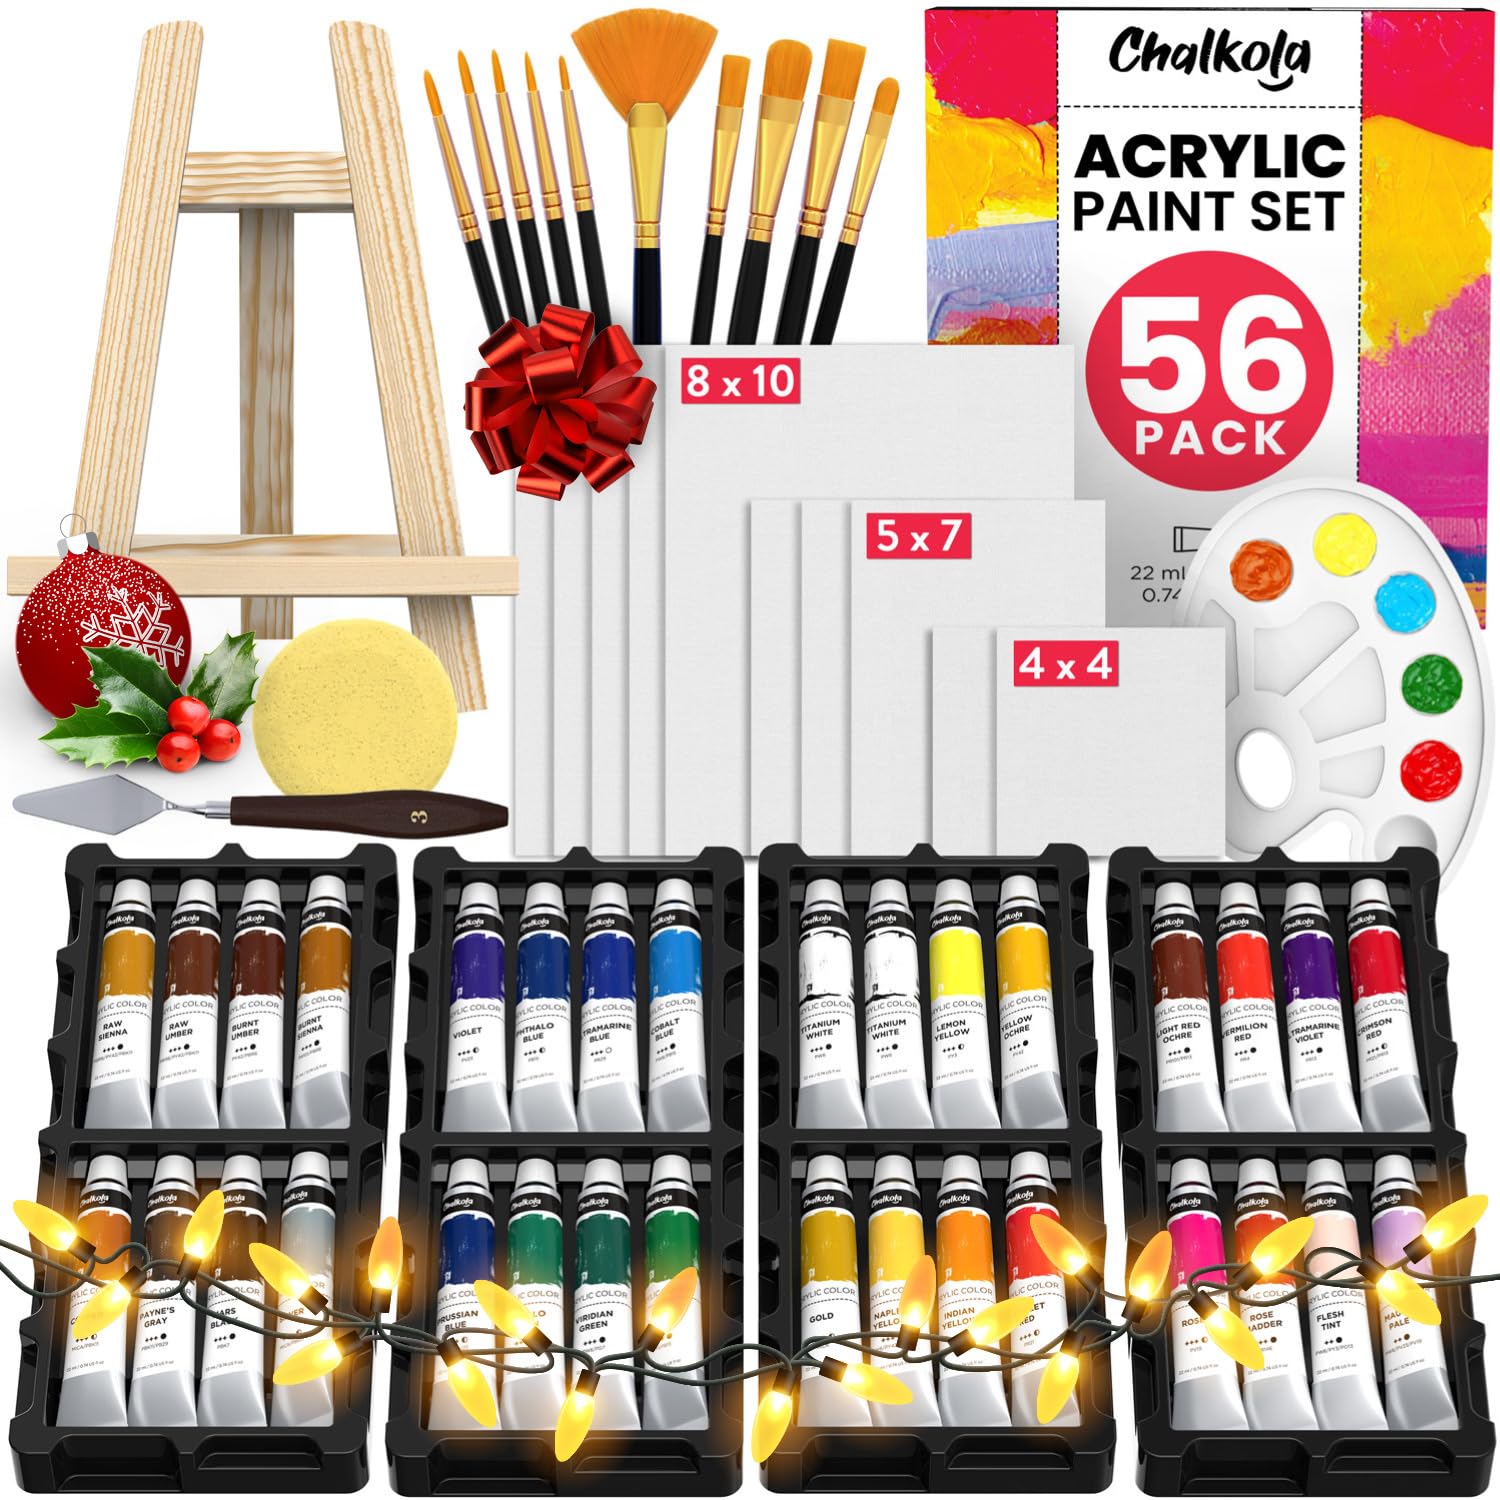 Chalkola Acrylic Paint Set for Adults & Kids - 56 Pcs Canvas Painting Kit with 32 Paints (22ml), 10 Brushes, 10 Canvases, Tabletop Easel, Palette, Kni